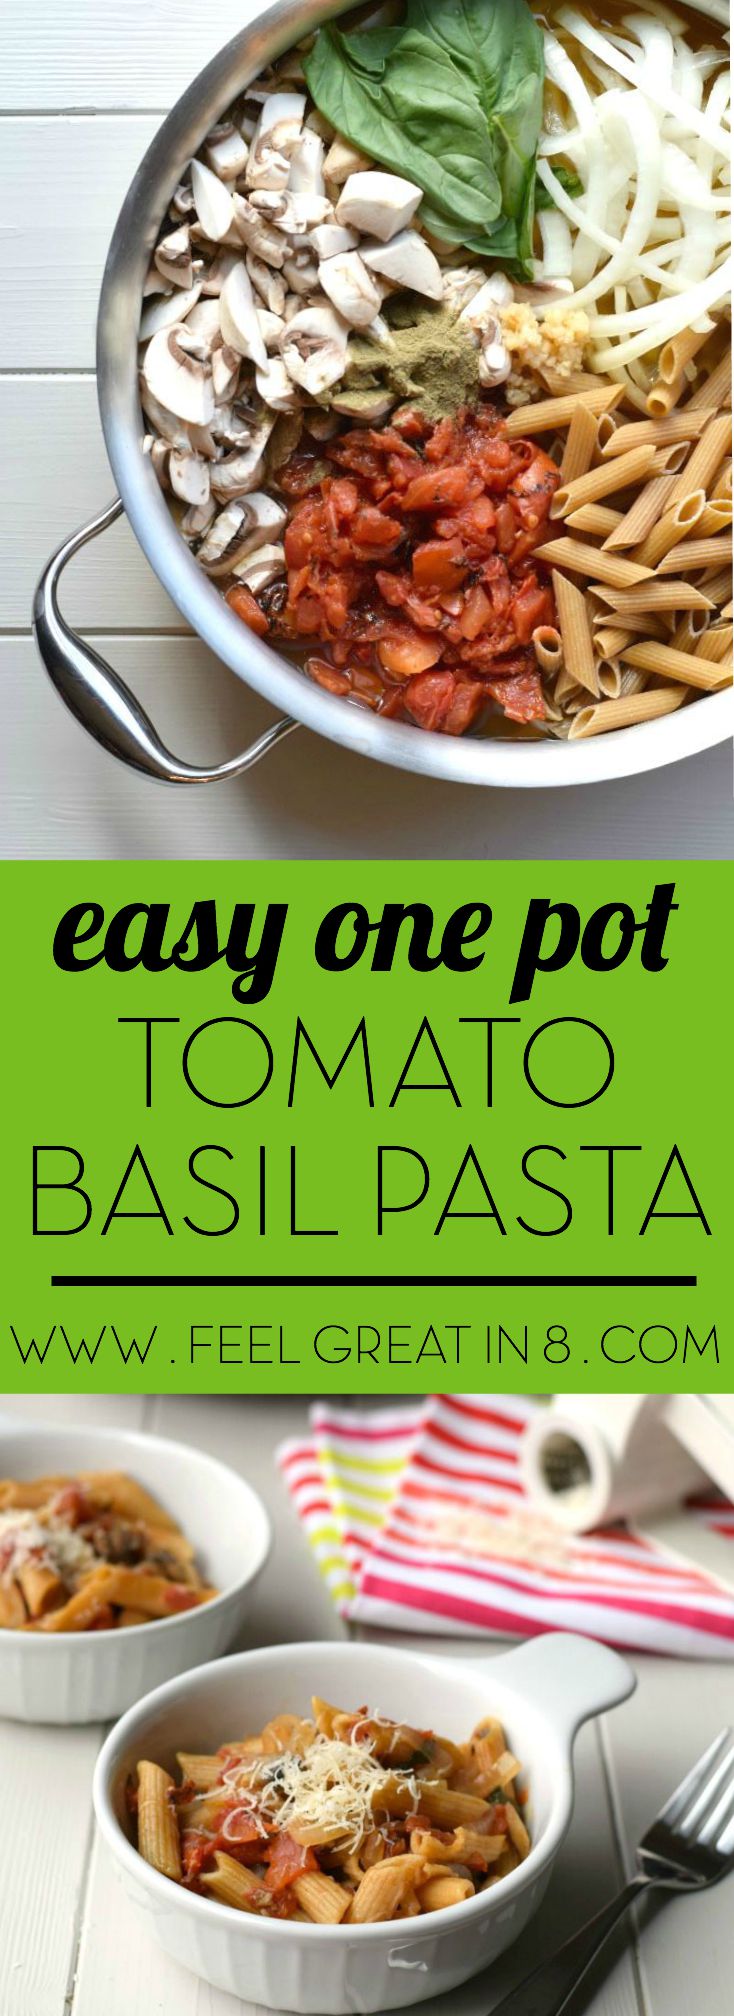 You won't believe how easy it is to make this delicious one pot pasta recipe! Just throw all of the ingredients into a pot, including uncooked pasta, and less than 20 minutes later you have a healthy dinner on the table!